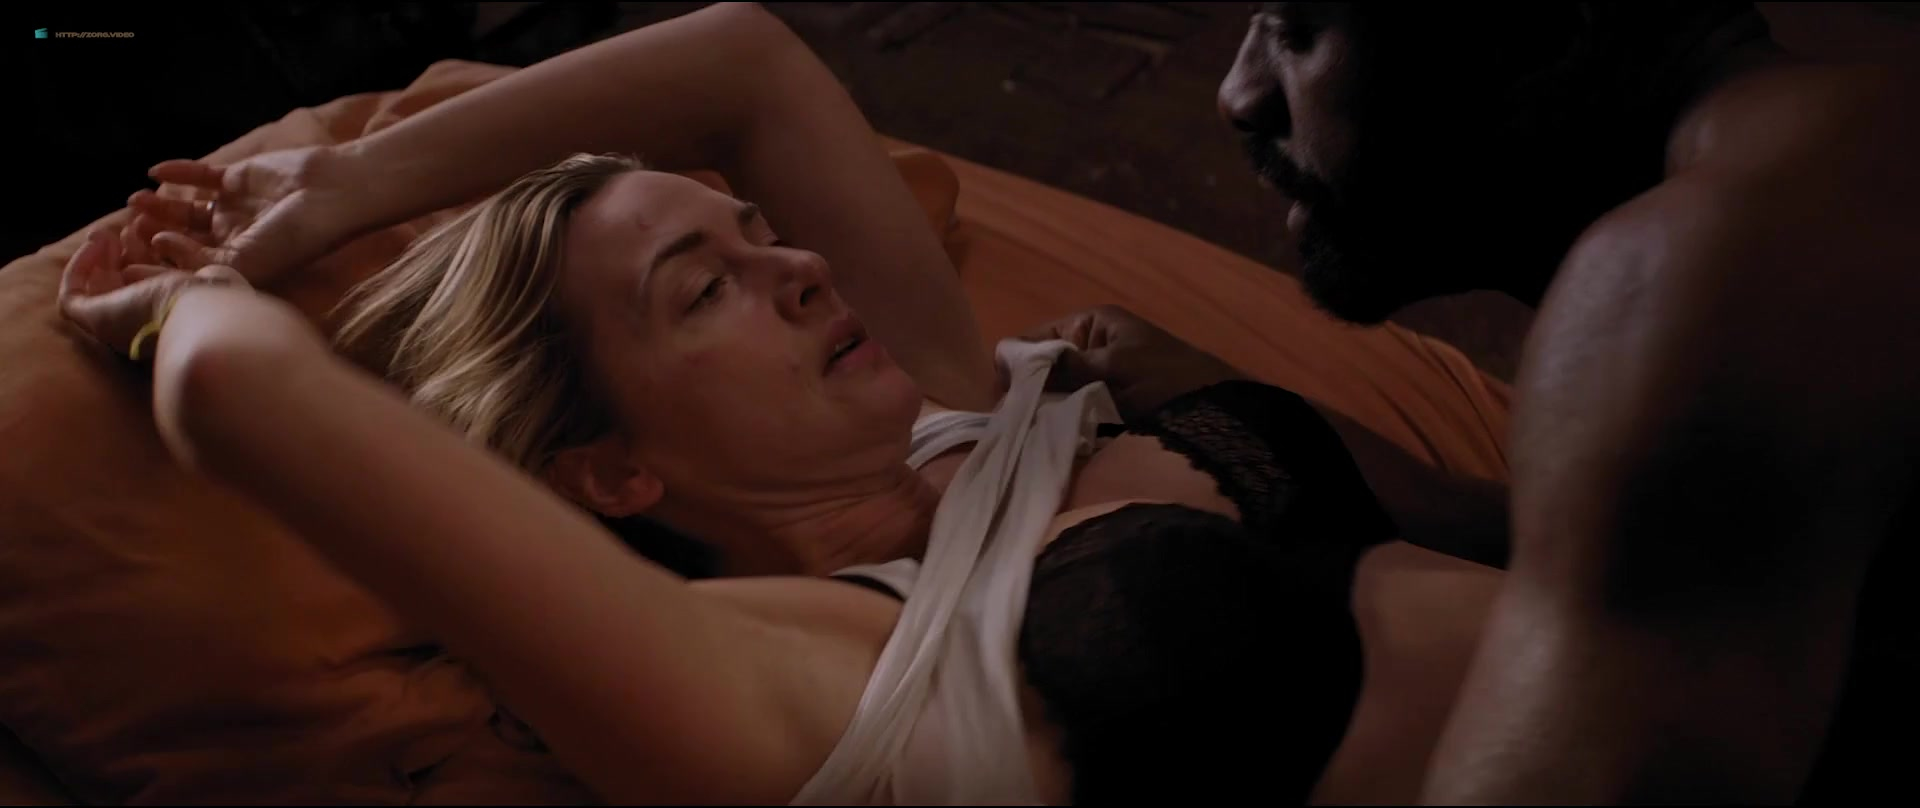 Kate Winslet sexy - The Mountain Between Us (2017)